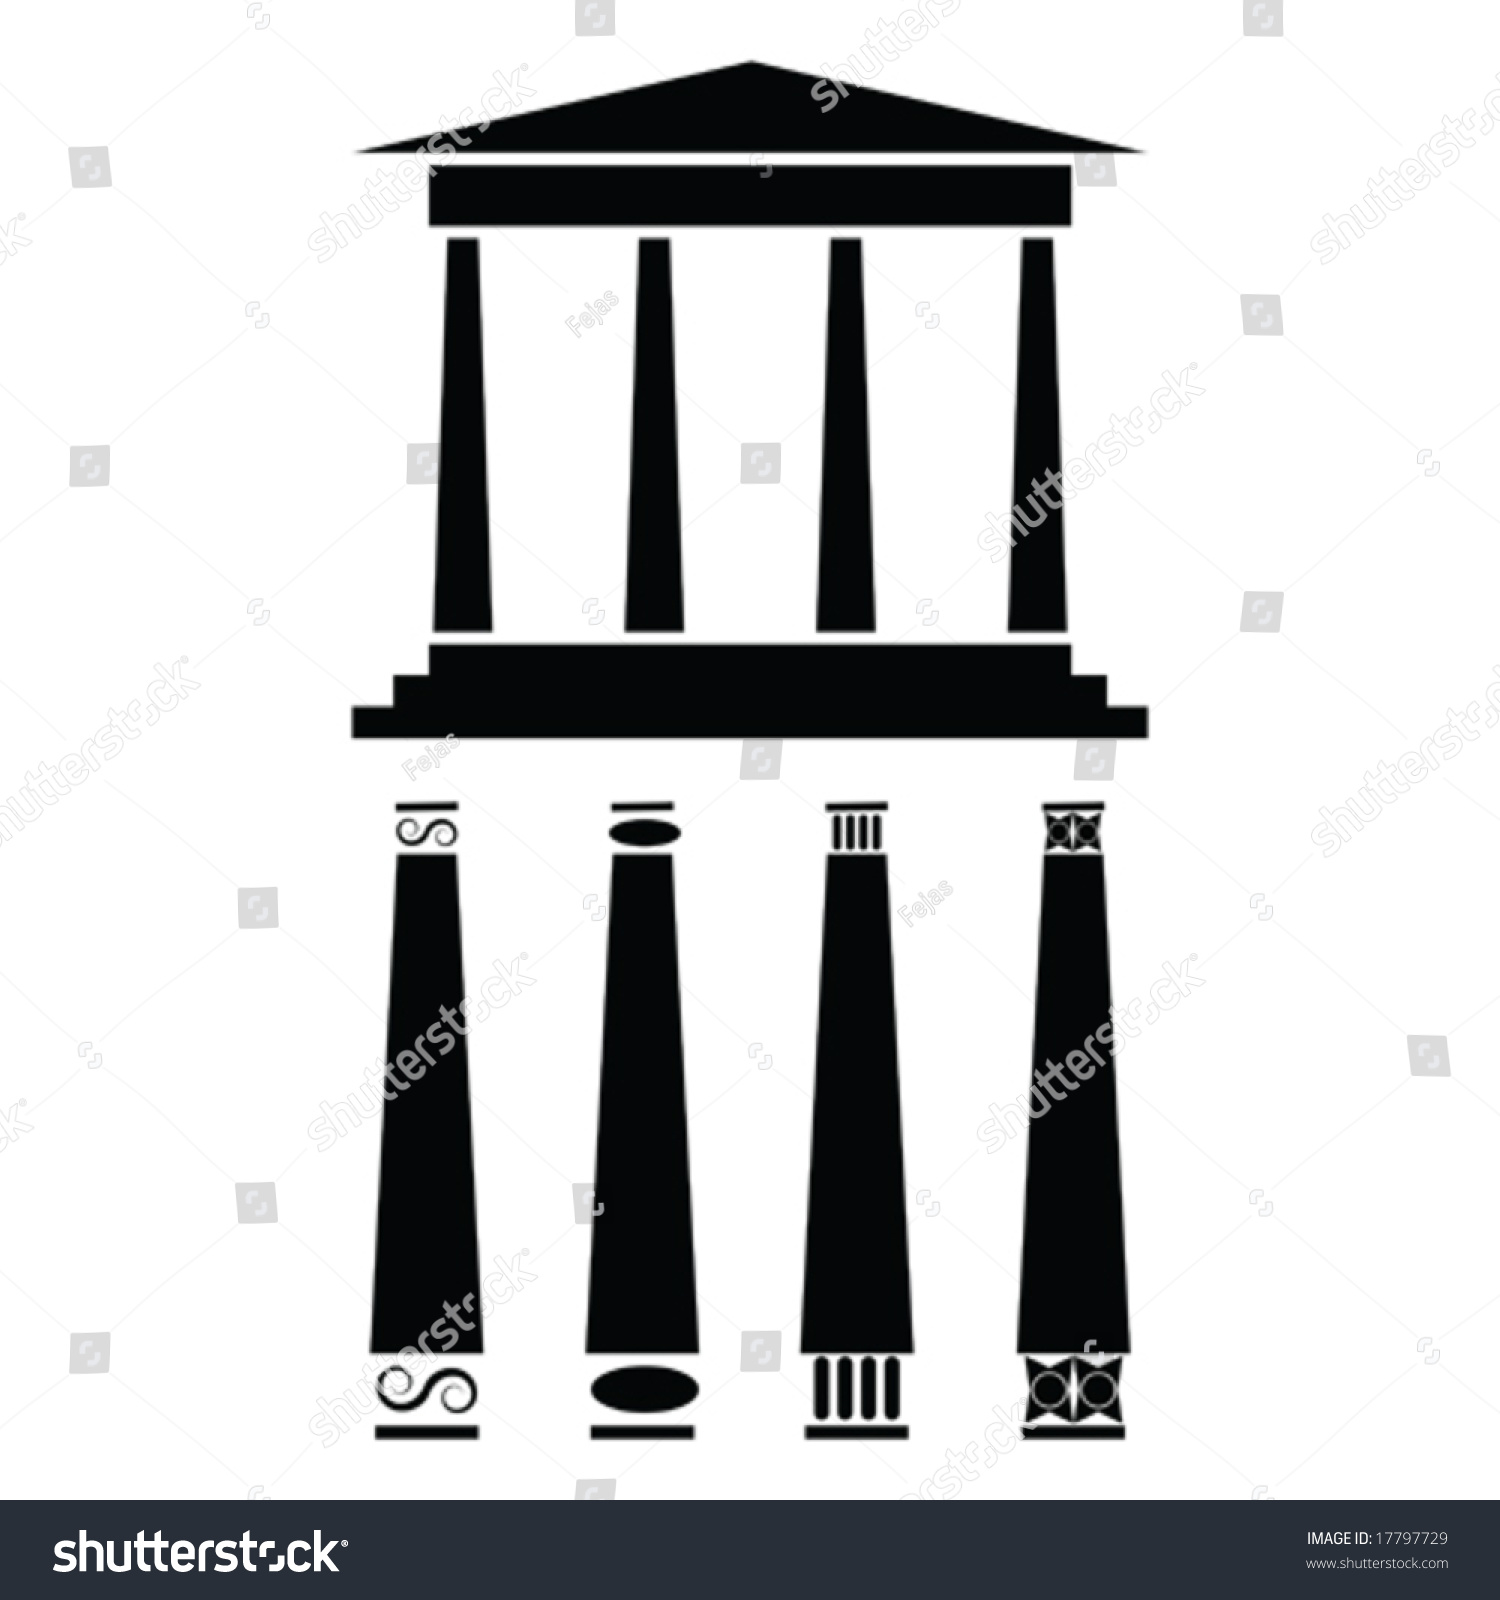 Vector Icon Illustration Of Ancient Greek Style Temple Or Building. For ...